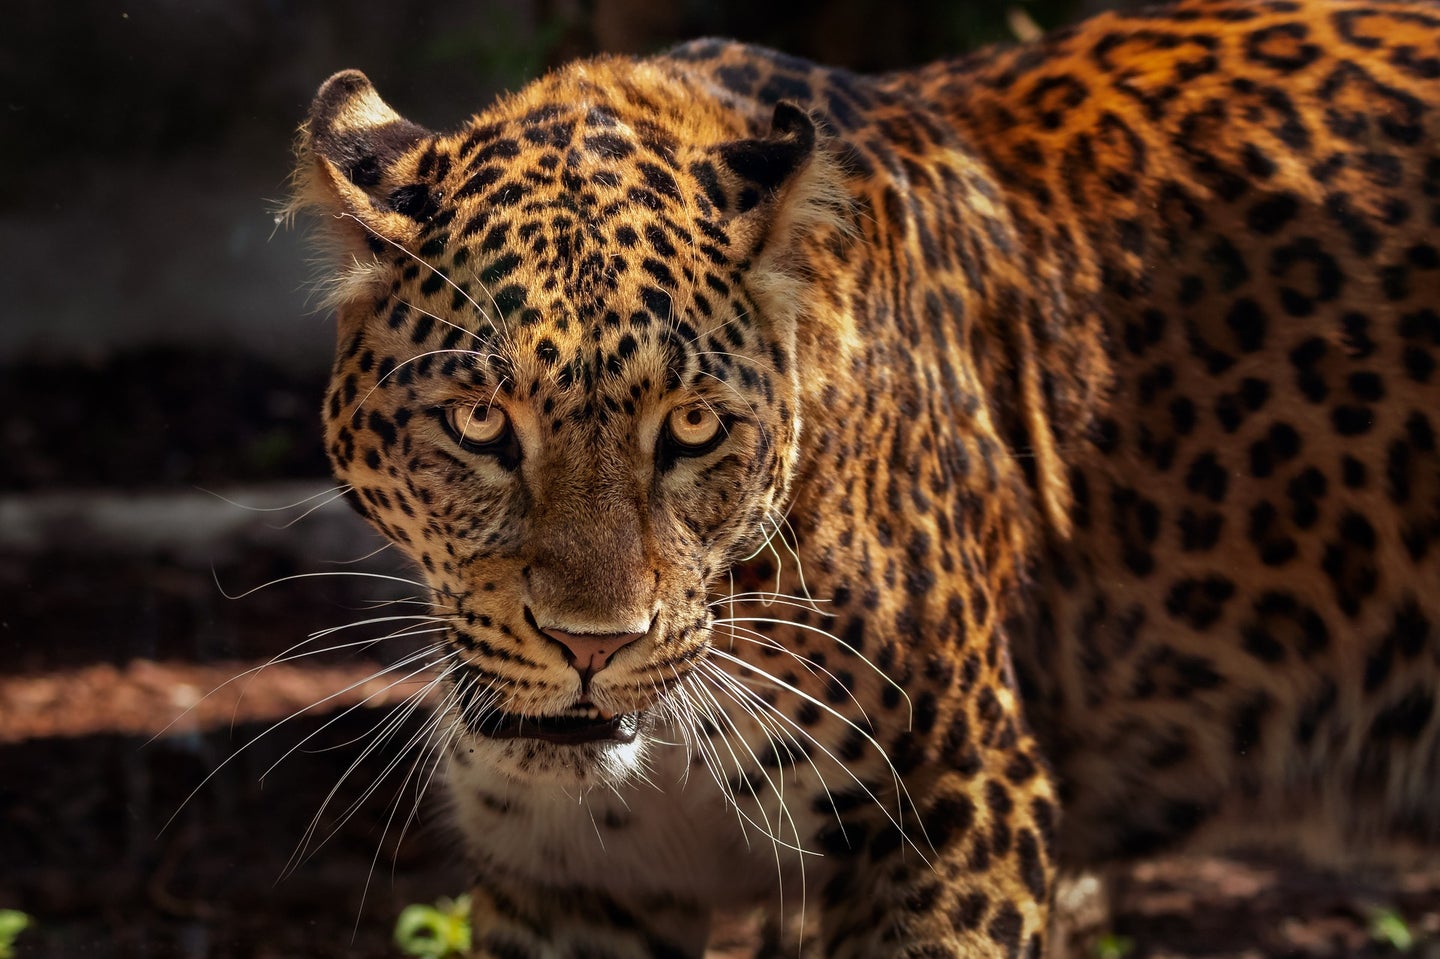 Jaguars may soon be reintroduced in Arizona and New Mexico.